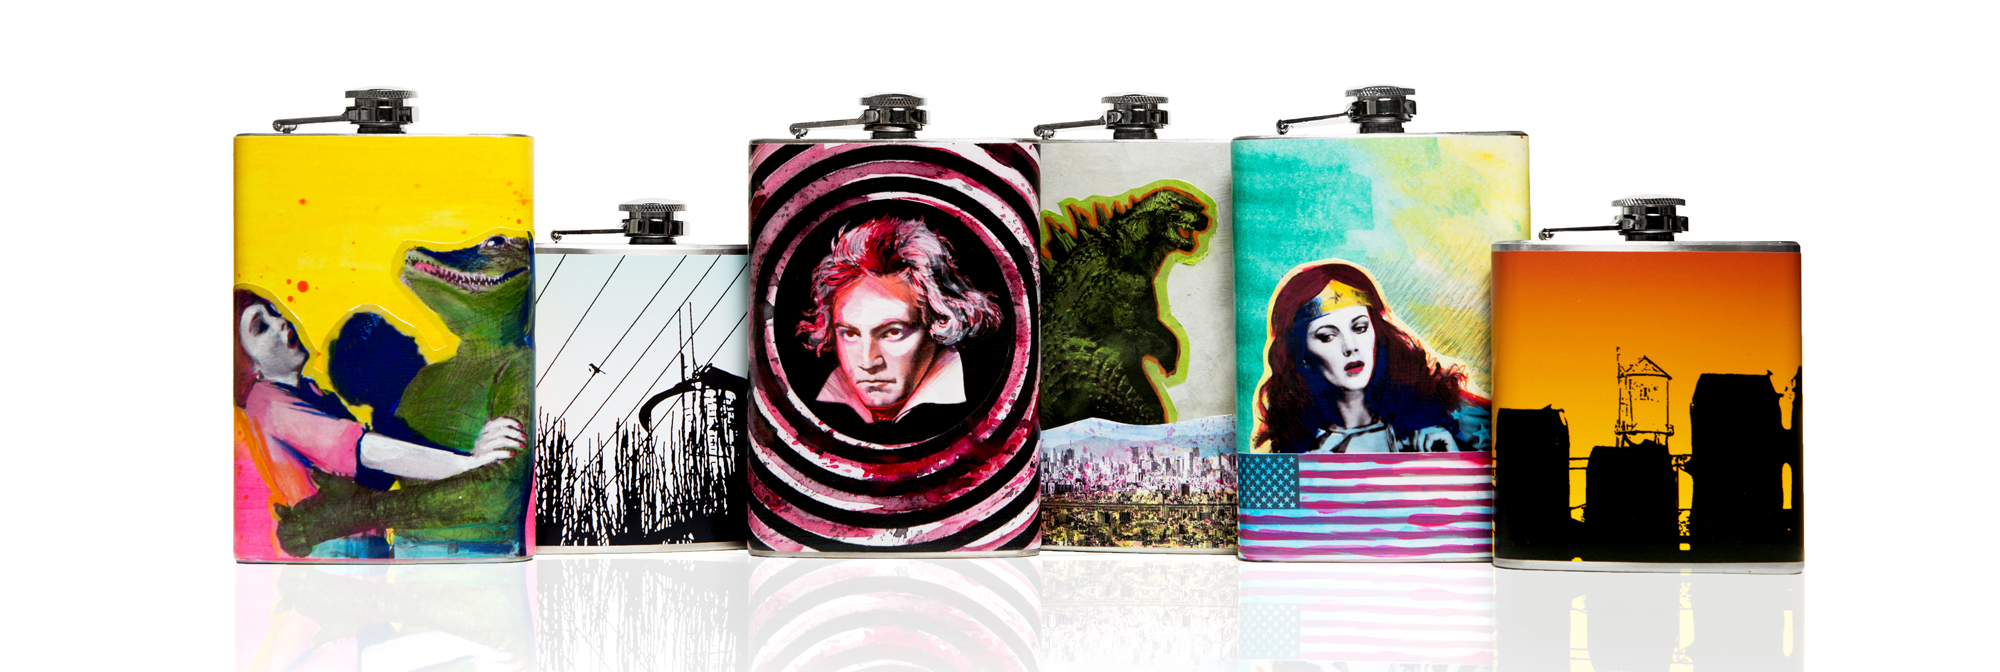 Each limited-edition flask is signed and numbered by the artist–the perfect gift or keepsake for fans of art, spirits, and cool collectibles. PHOTO CREDIT: Nirav Solanki. COURTESY OF FLASKING.COM.